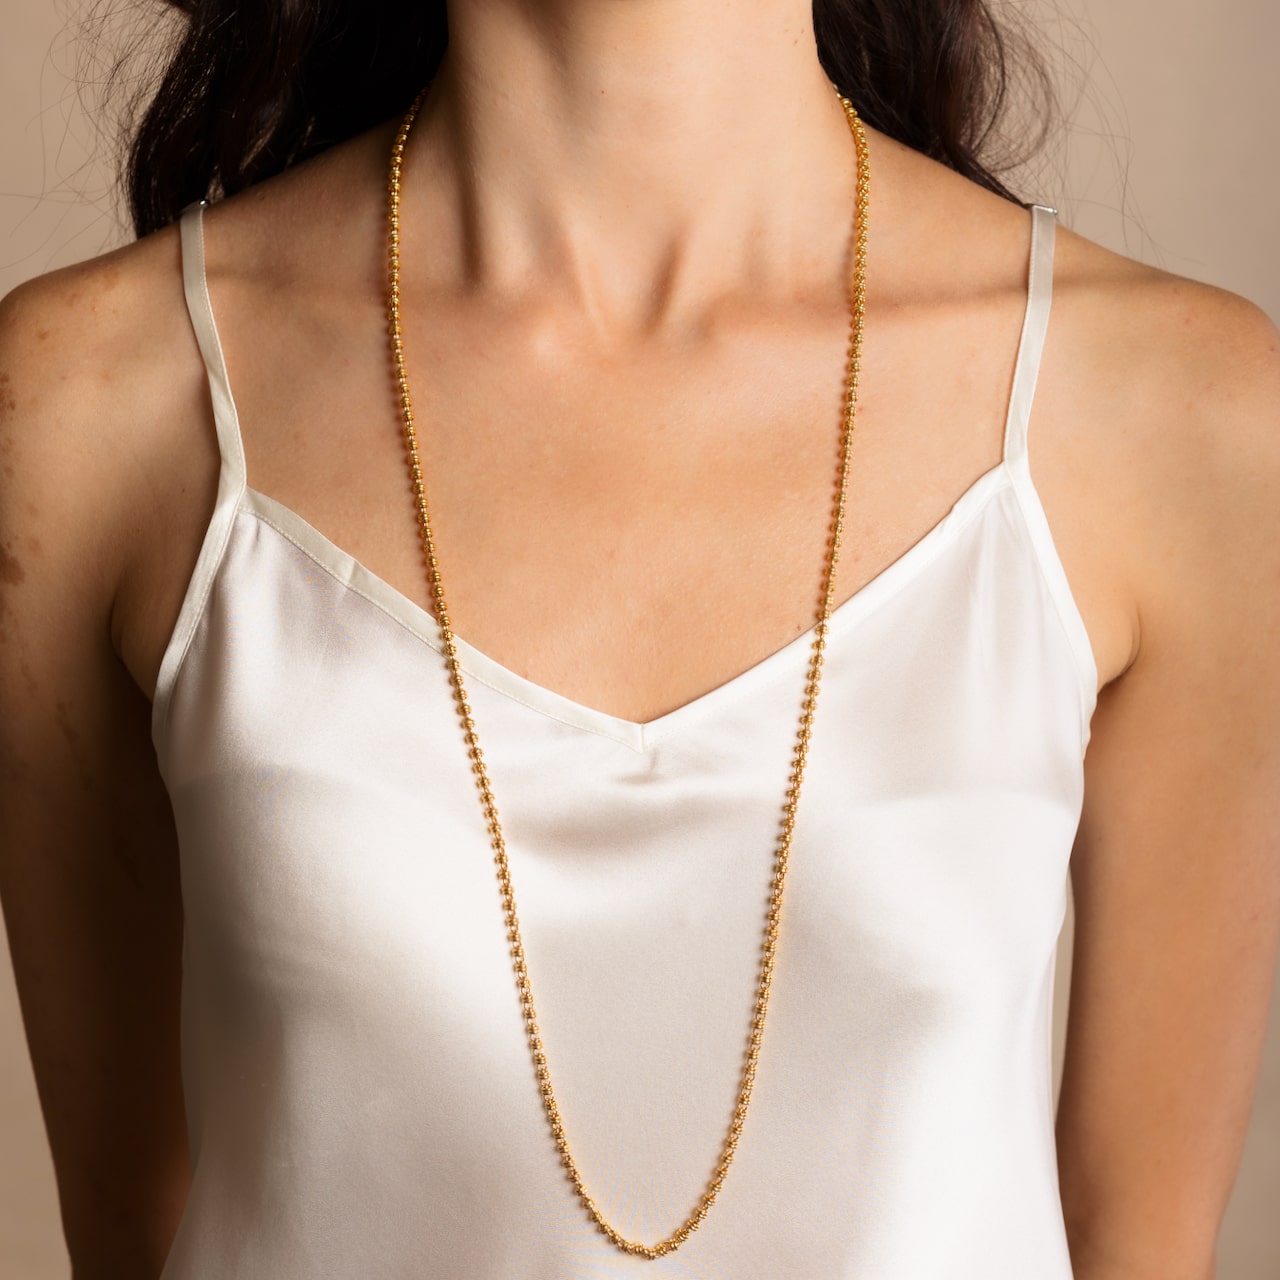 Beads 3mm Necklace in Gold – DelBrenna